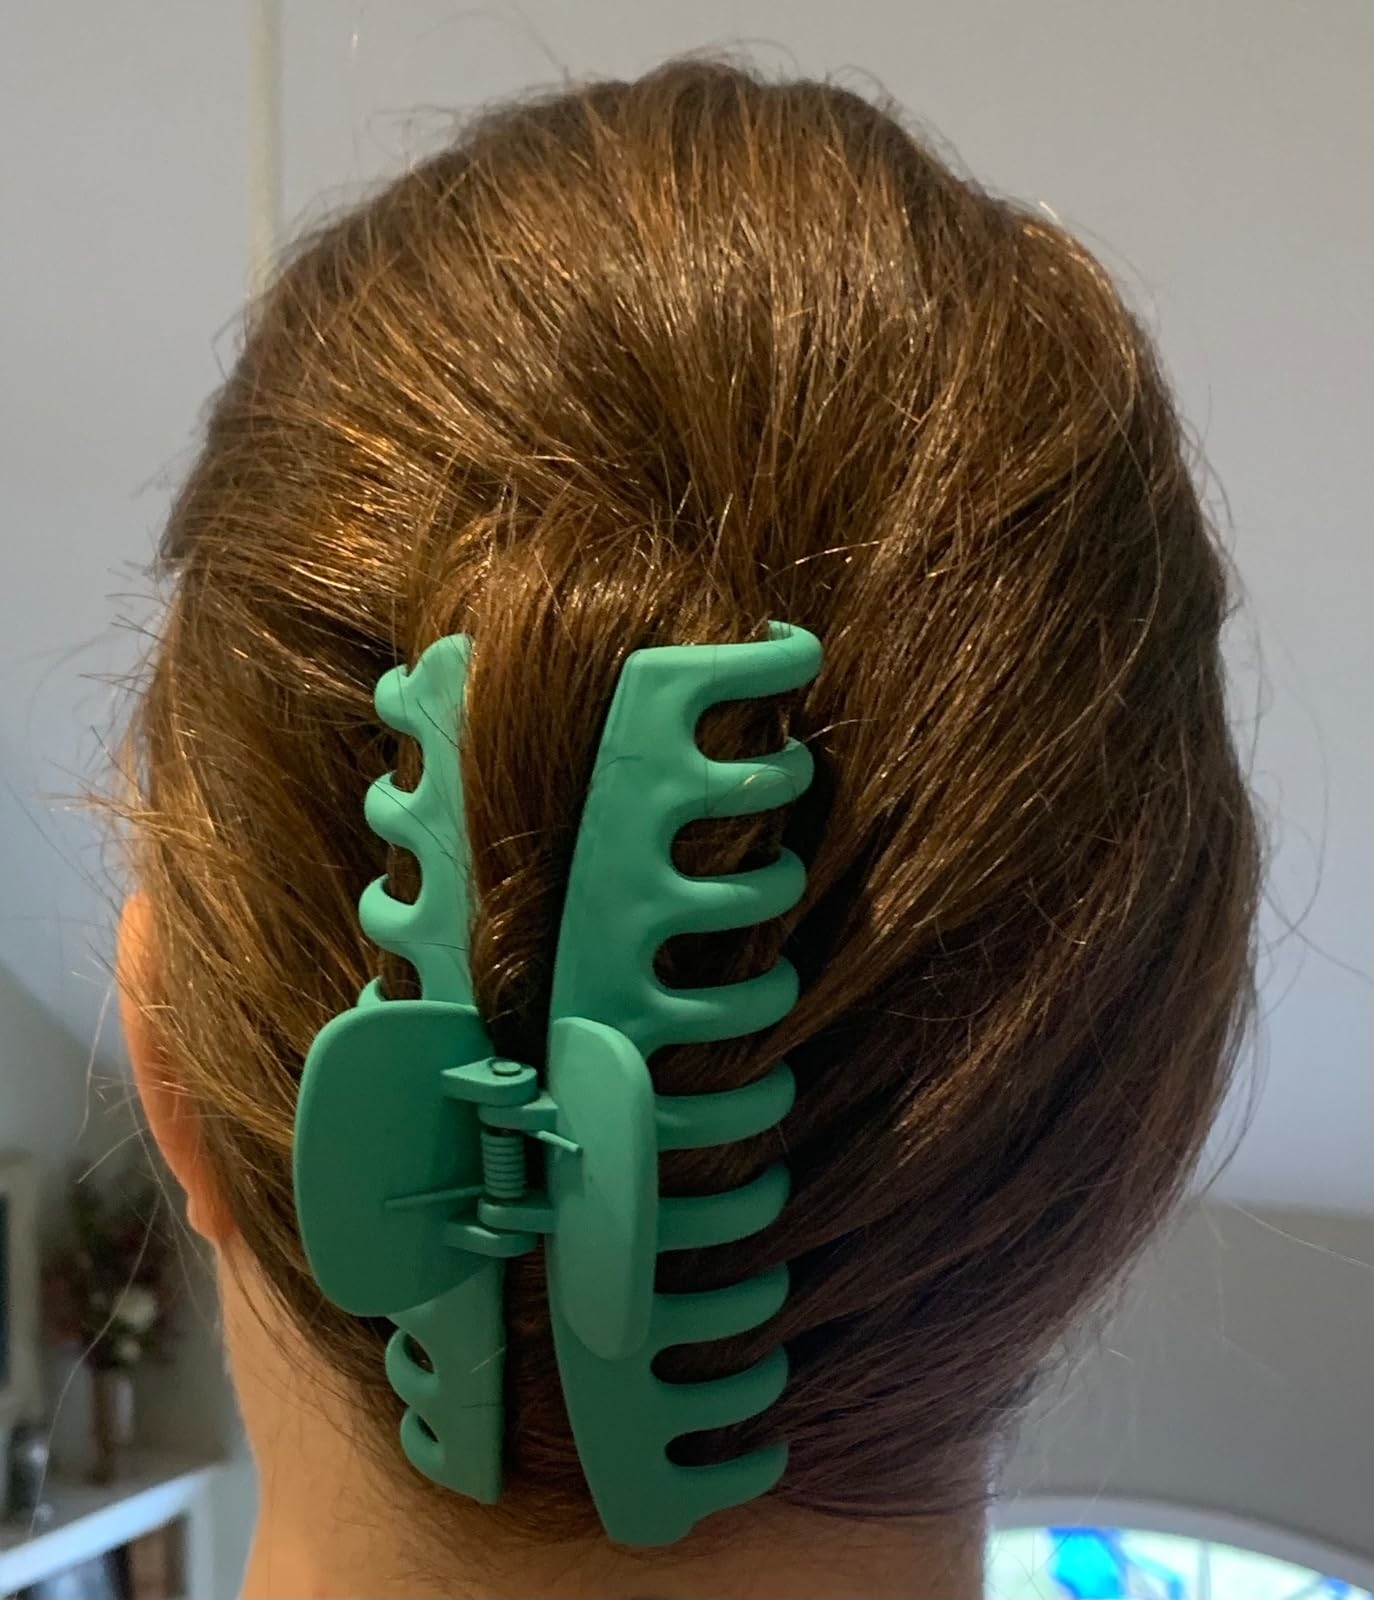 Reviewer wearing the green clip in their hair